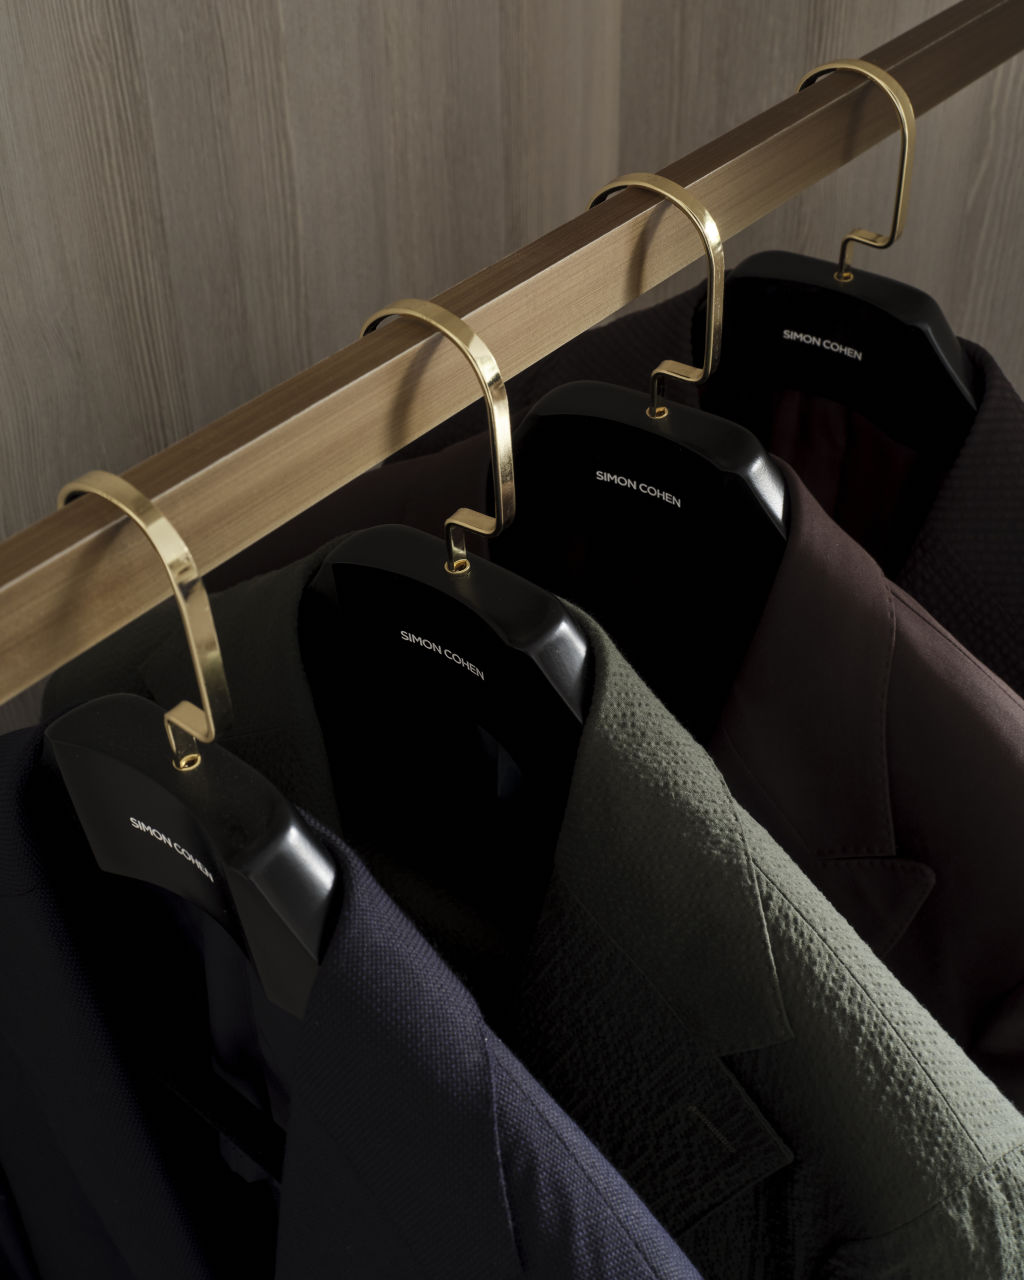 The coat hangers are personalised for a luxe touch. Photo: Supplied